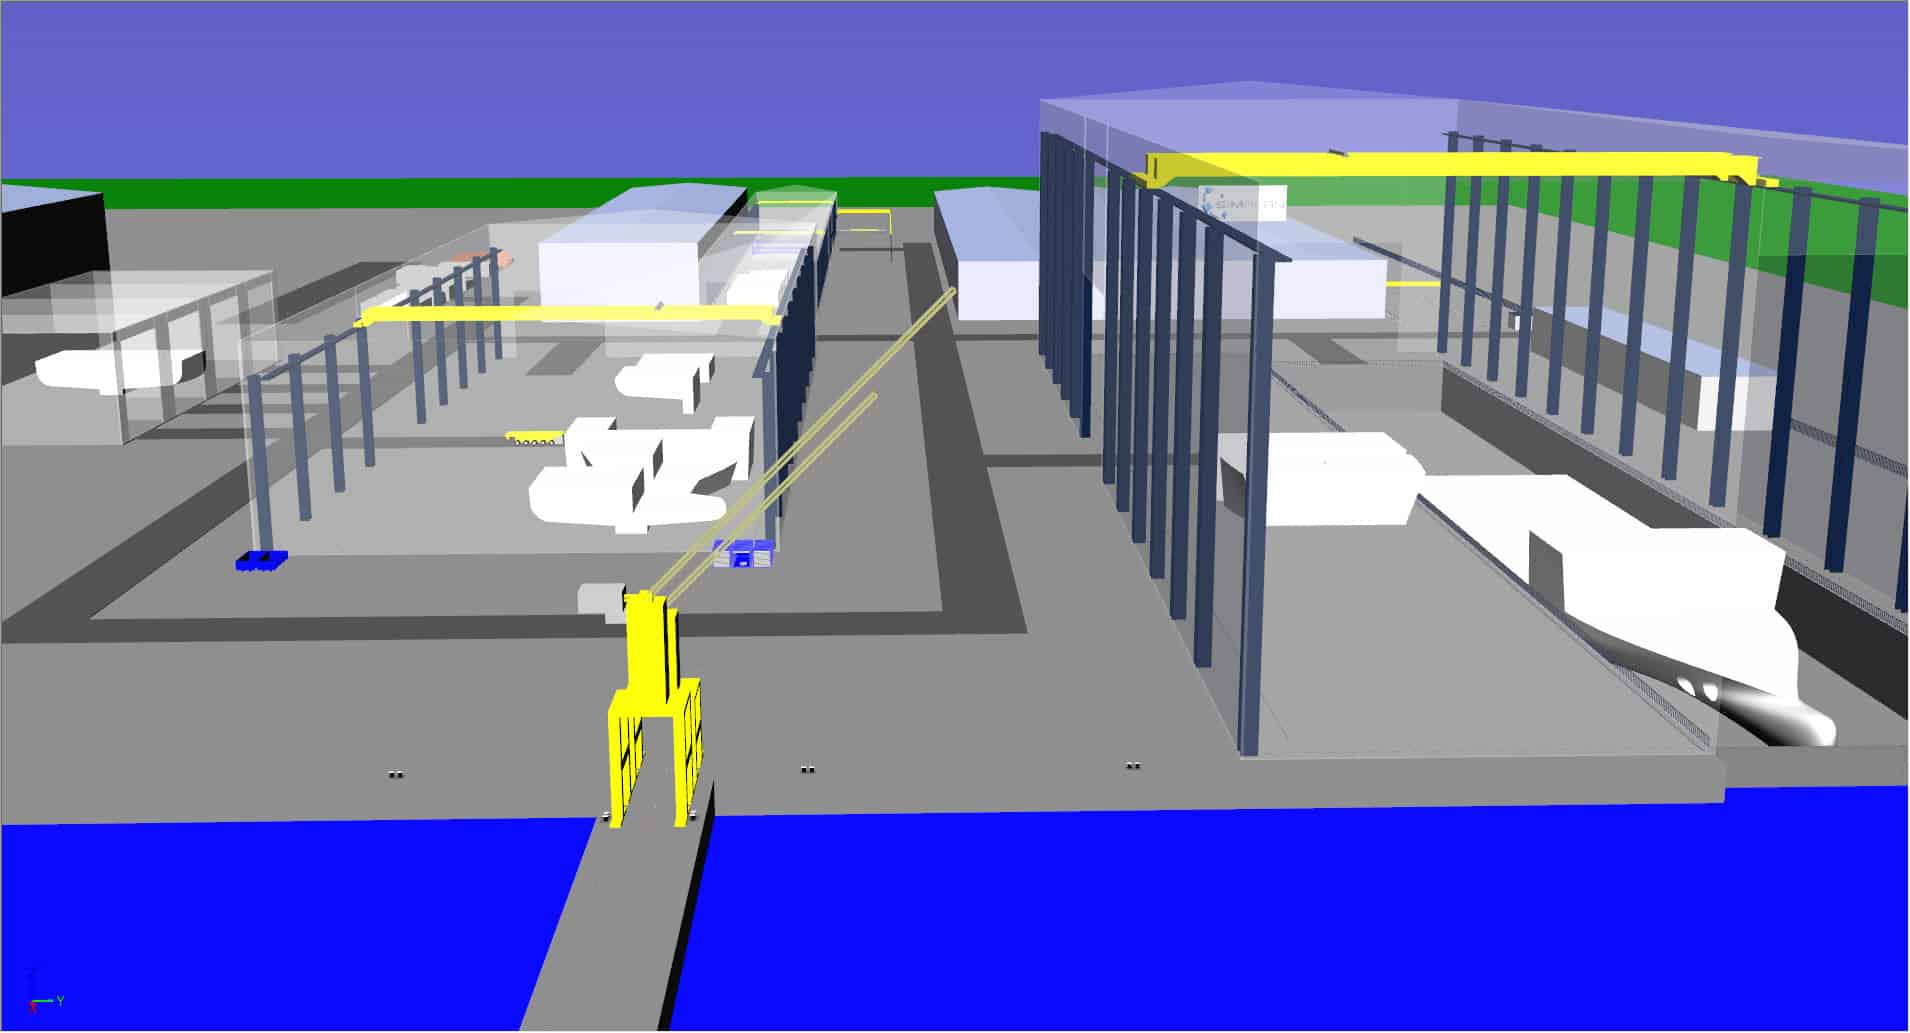 Simulation model of a shipyard with STS construction kit